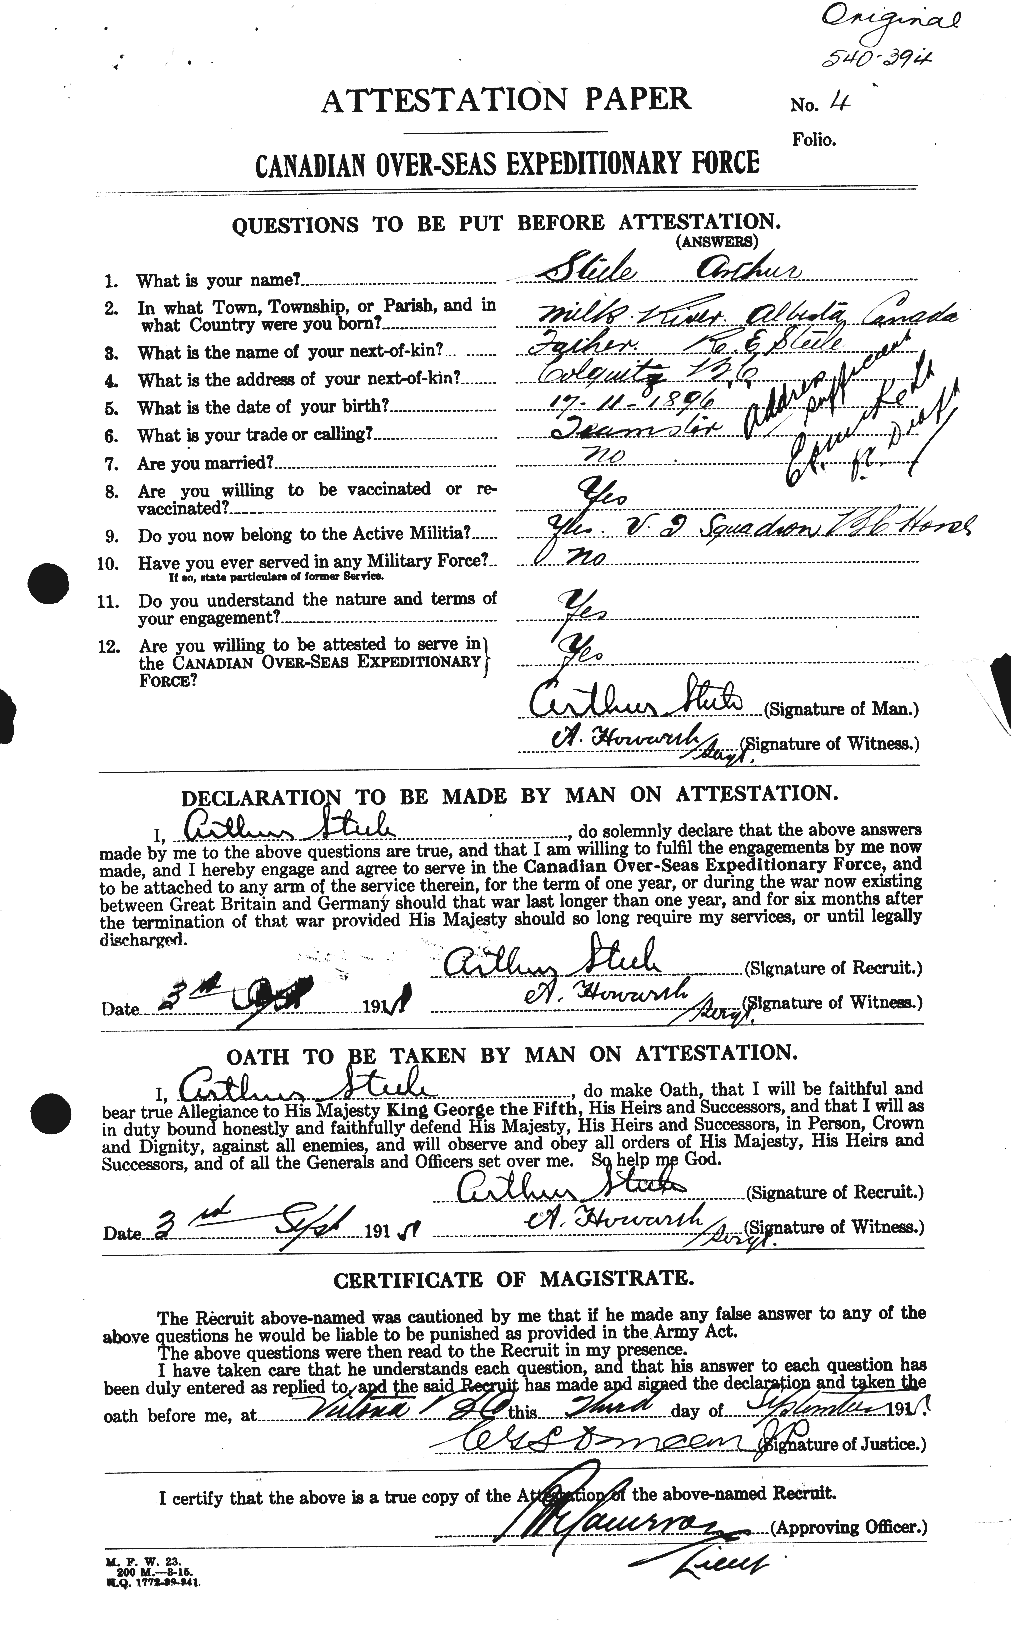 Personnel Records of the First World War - CEF 116240a